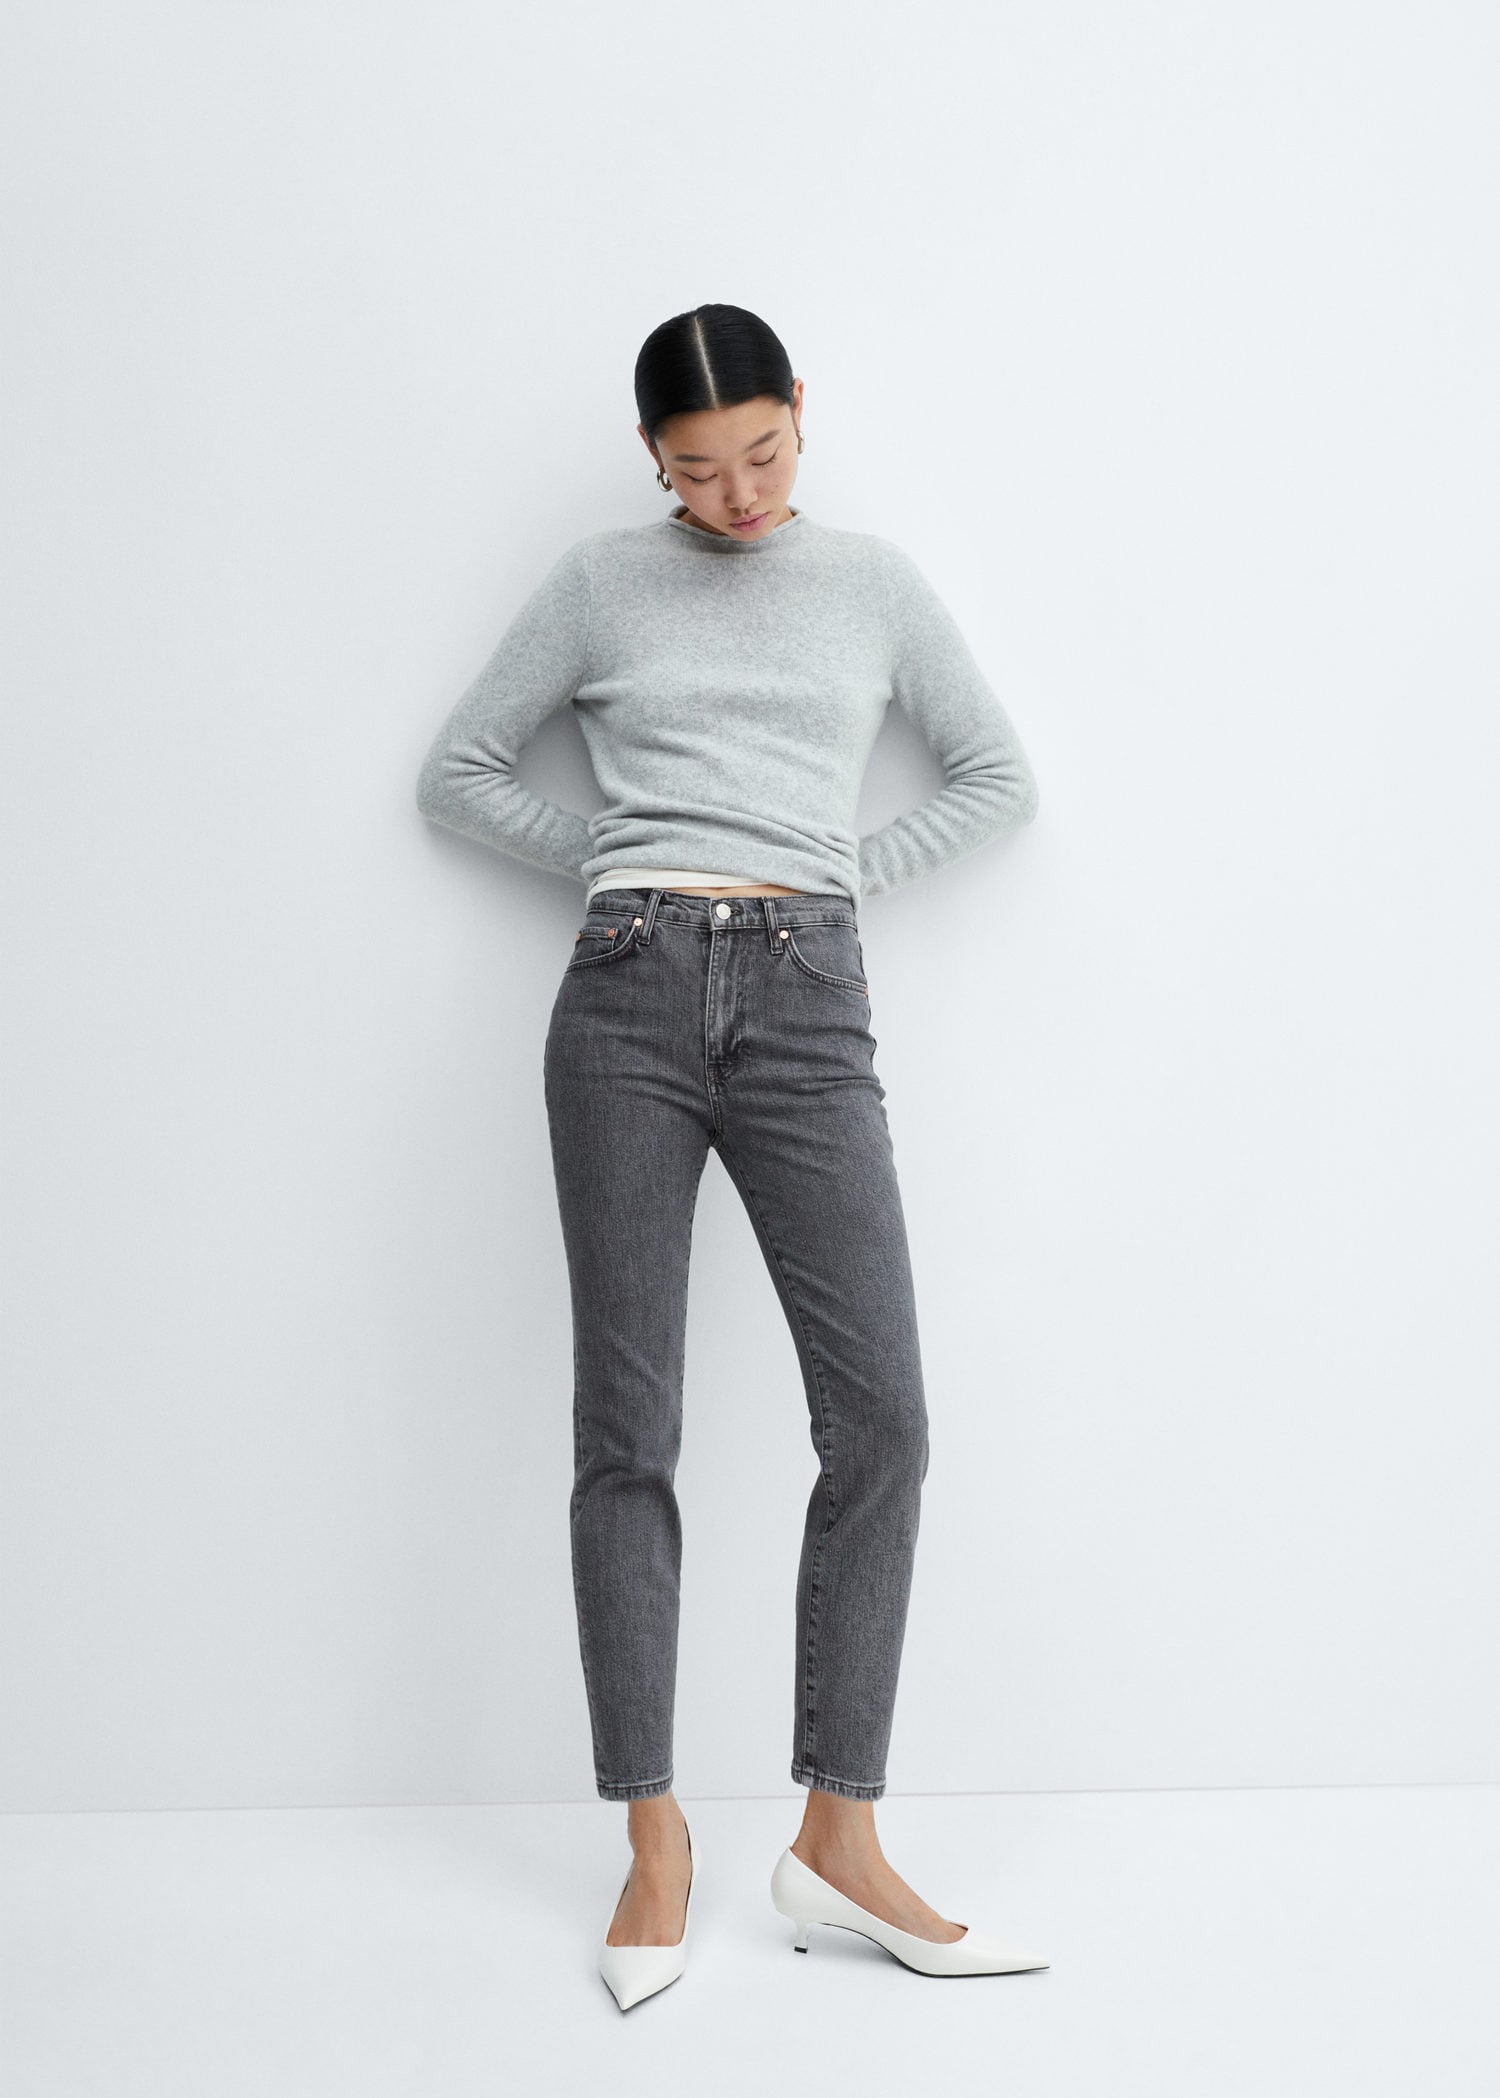 Cropped Jeans For Women, Crop Fit Jeans